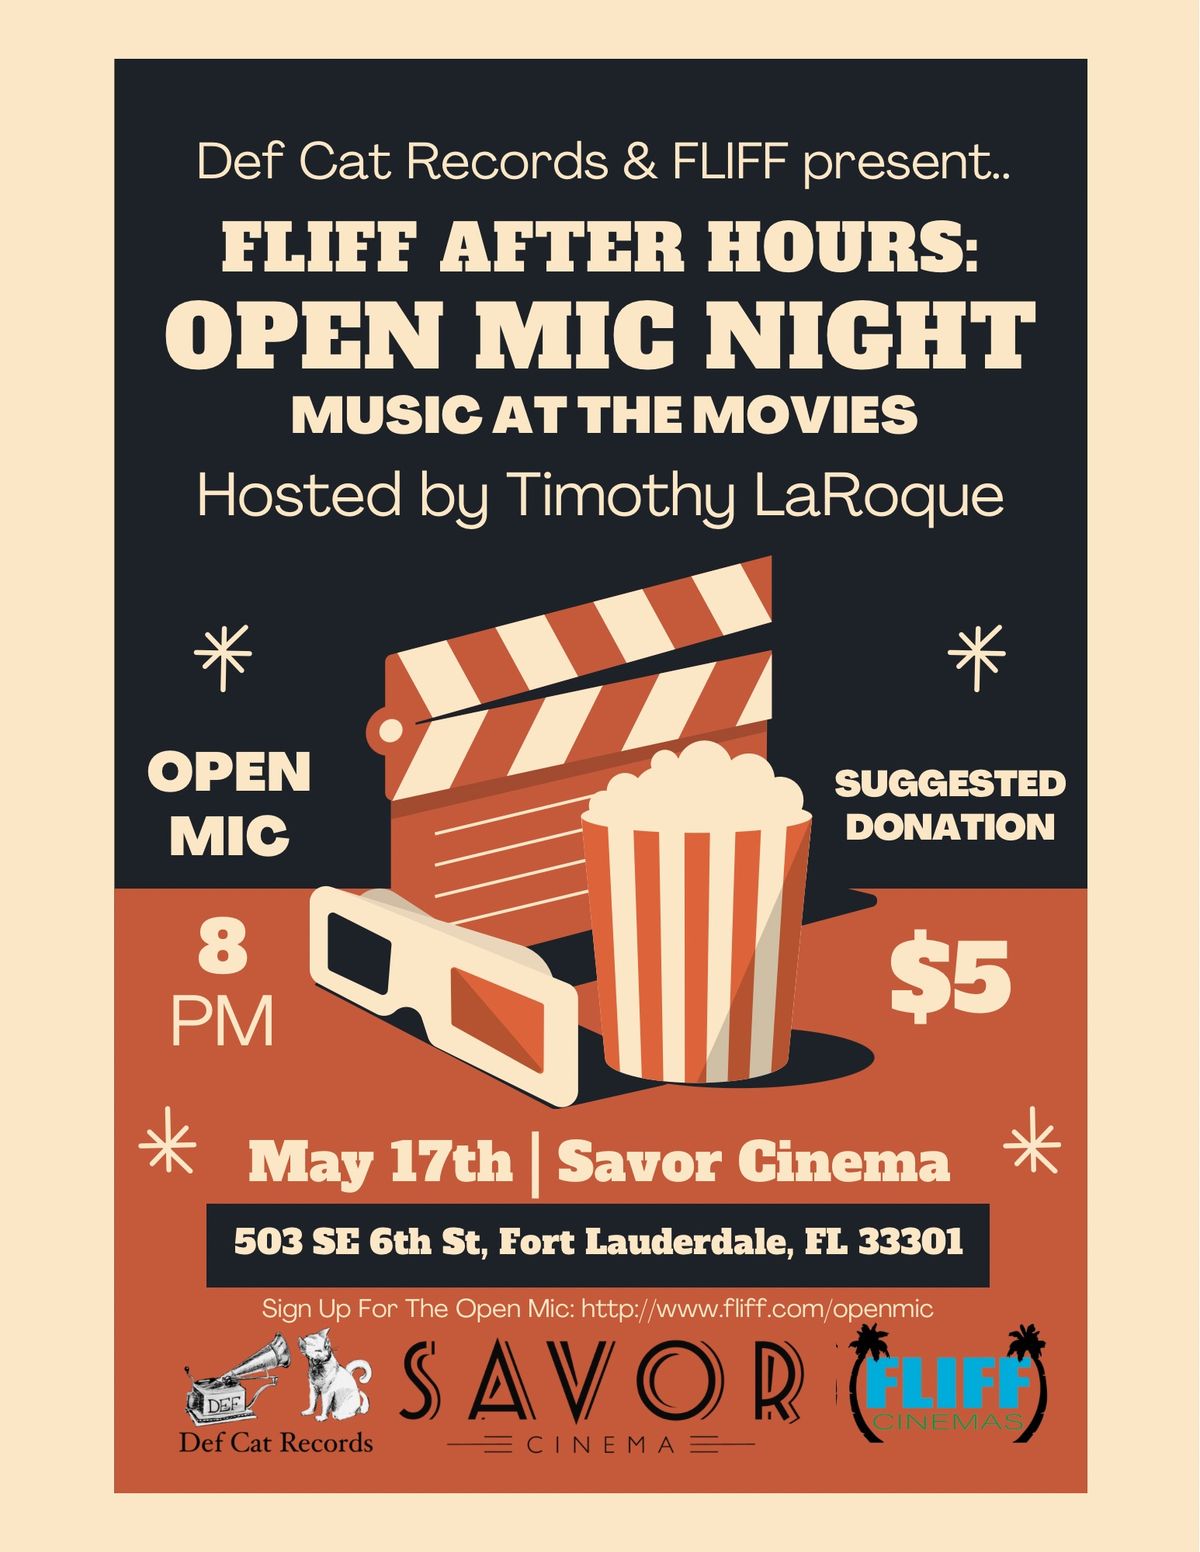 FLIFF After Hours: Open Mic Night (Hosted by Timothy LaRoque)